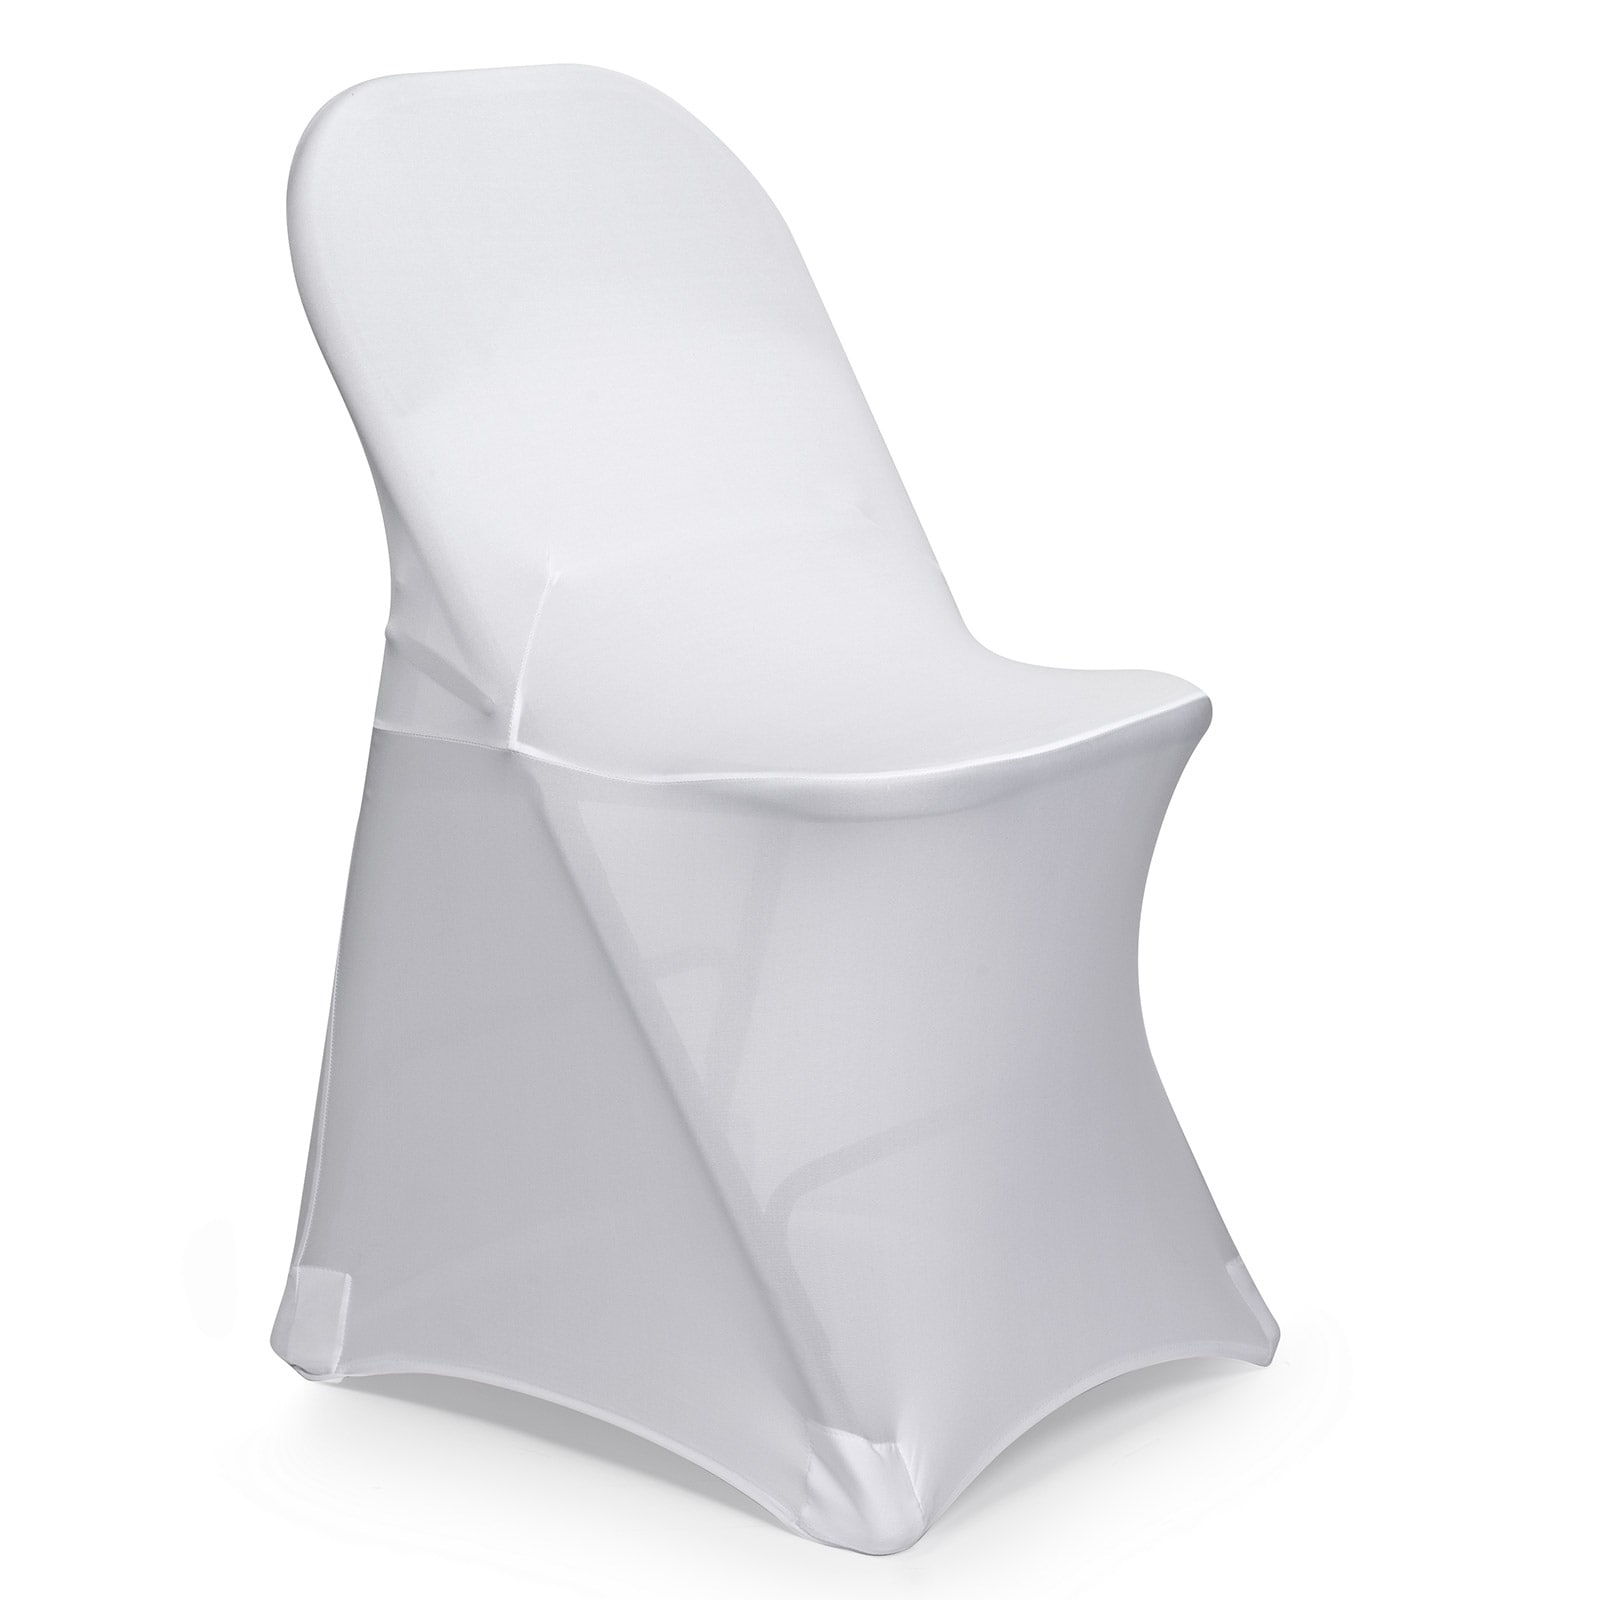 https://ak1.ostkcdn.com/images/products/is/images/direct/64772575799fa2fa340326448f97f2d21cc24664/100-Count-Spandex-Folding-Chair-Covers---White.jpg